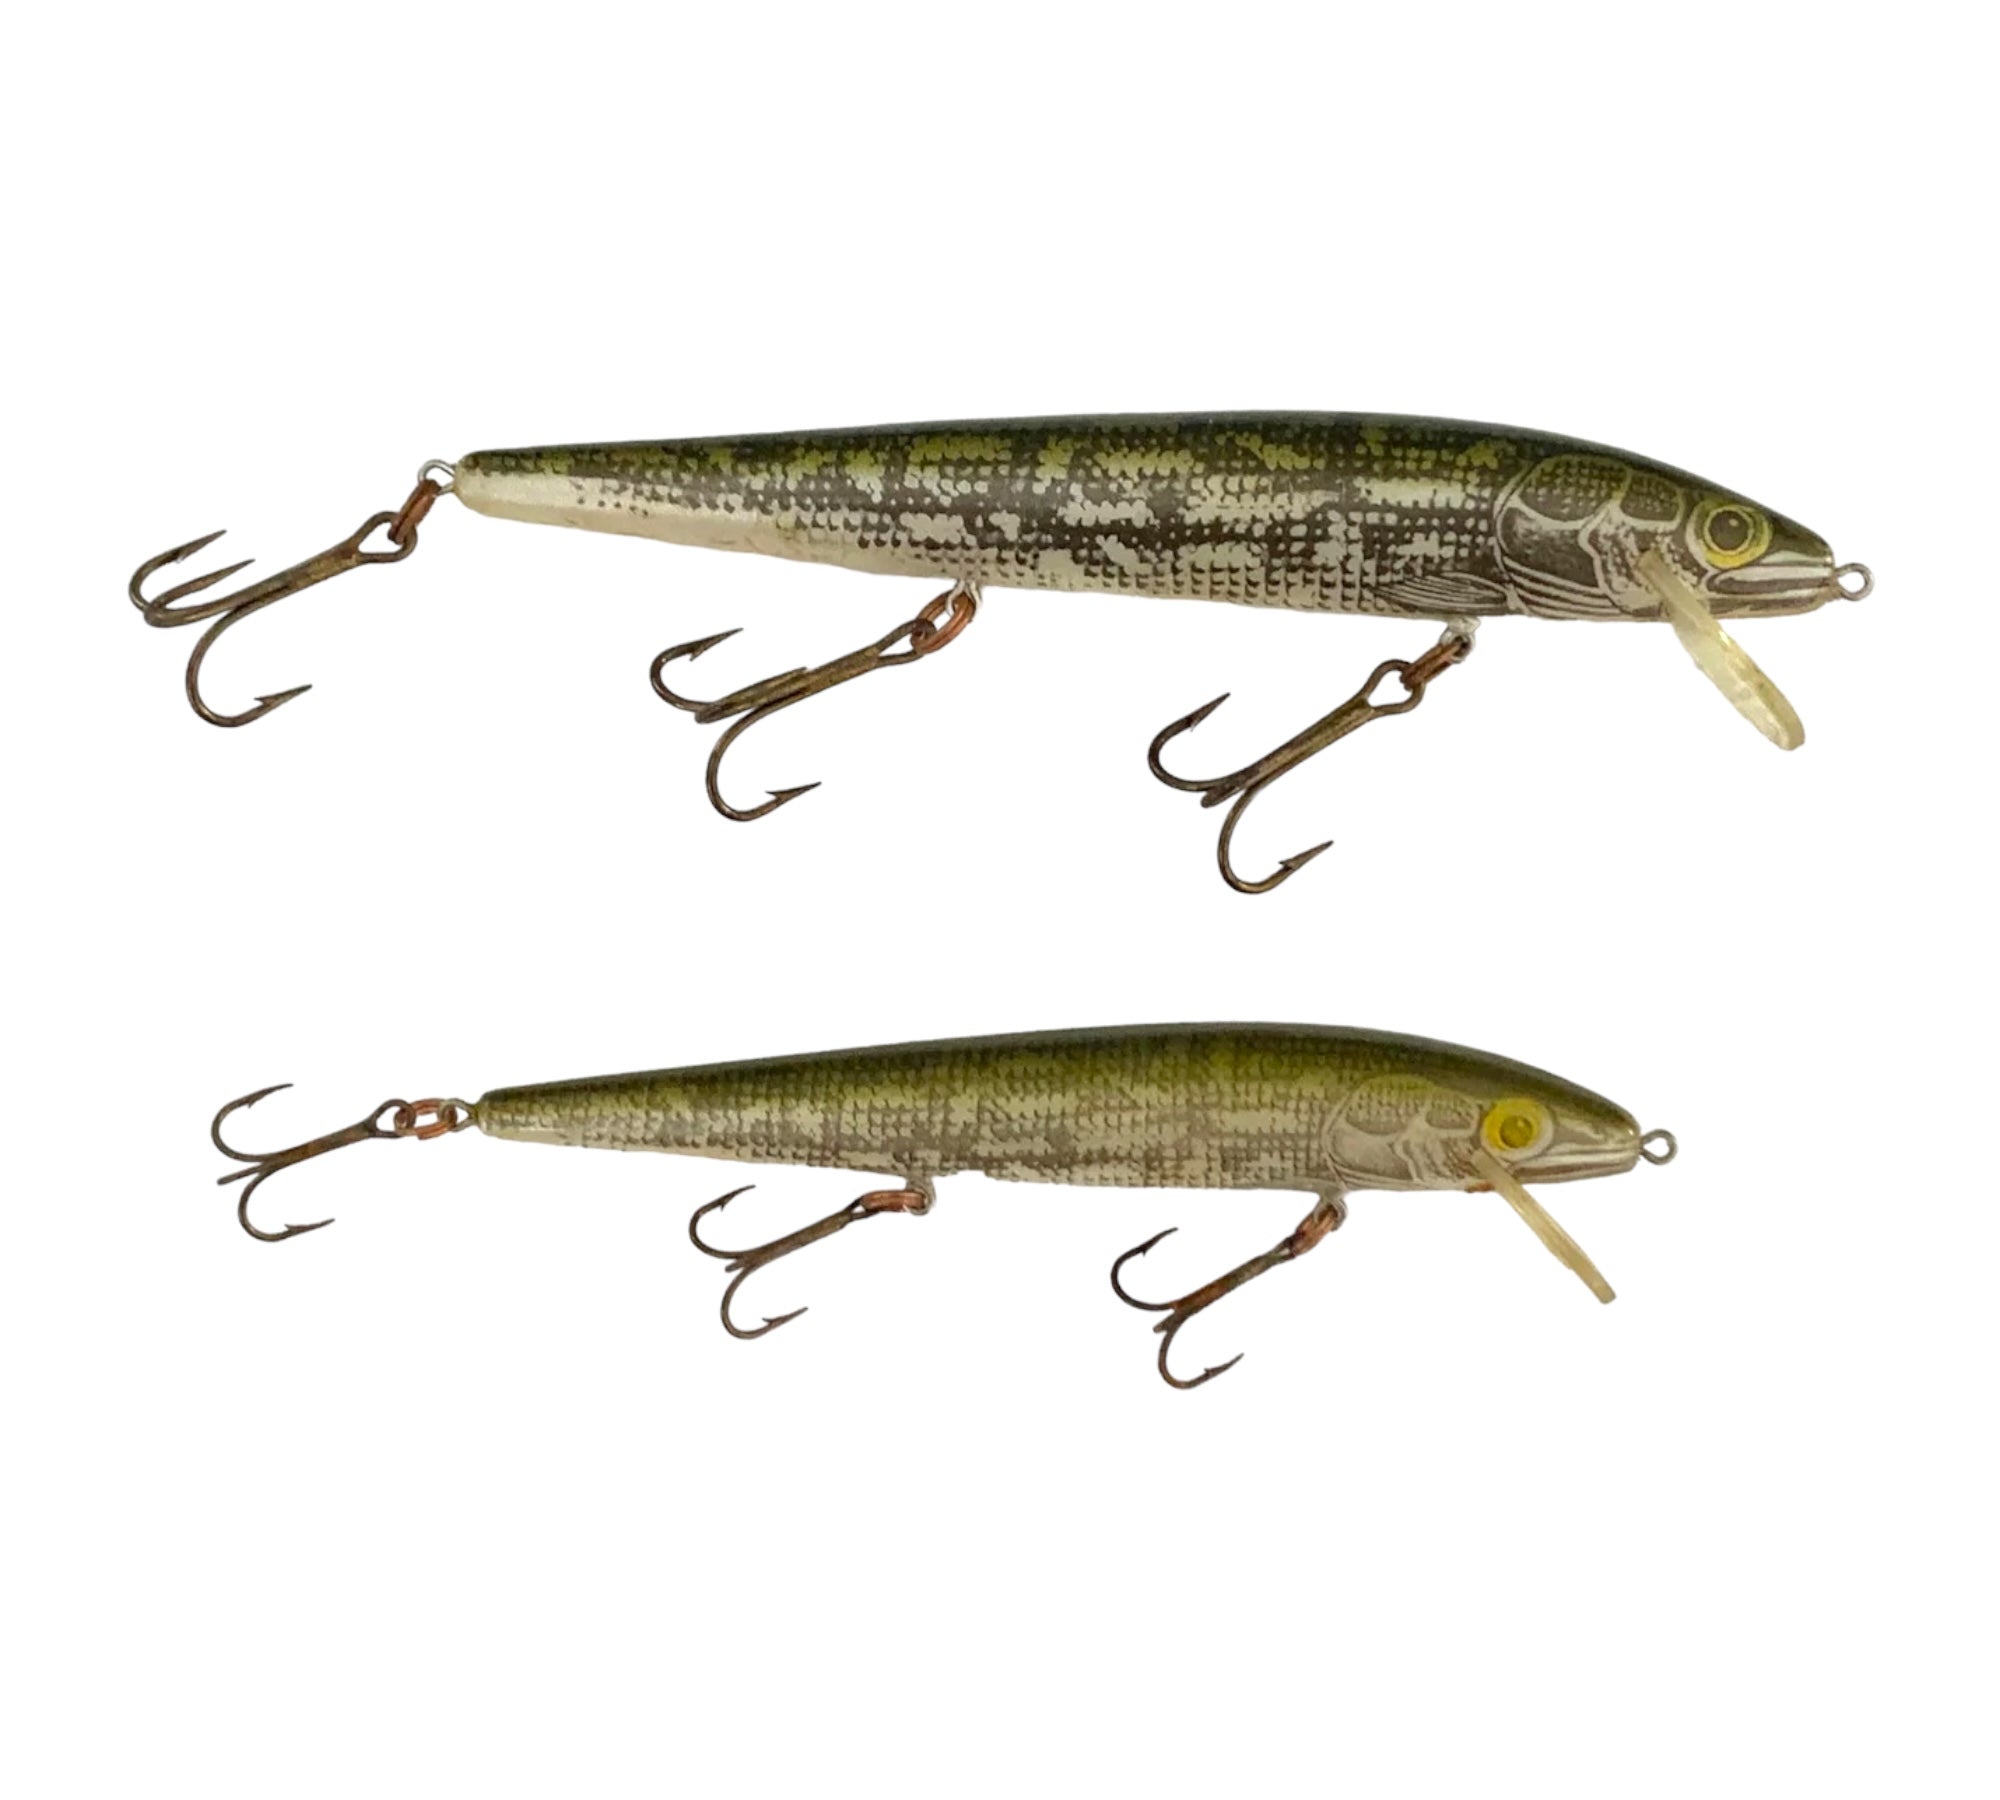 Lot of 2 REBEL LURES 4.5 & 5.5 MINNOW Fishing Lures